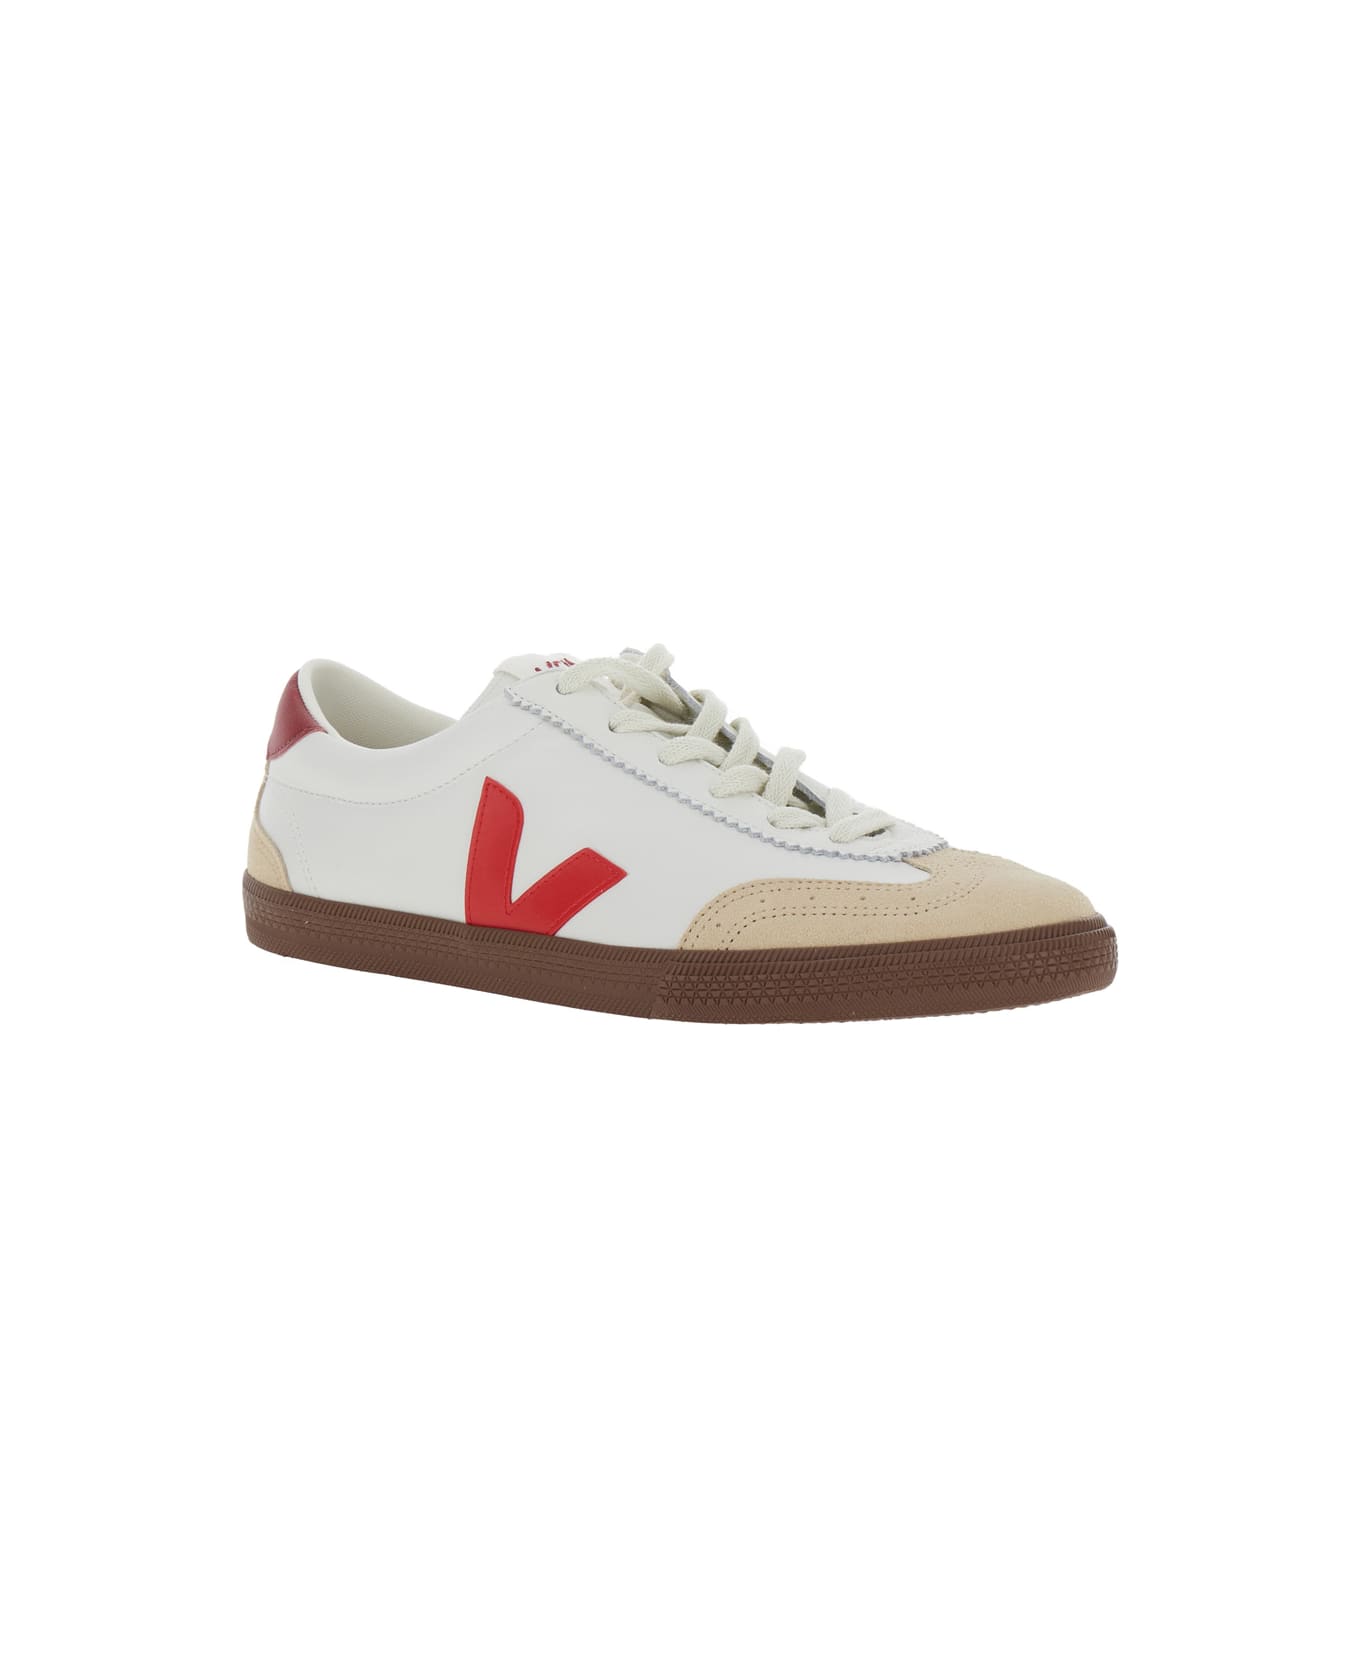 Veja 'volley' White Low Top Sneakers With V Logo Detail In Leather And Suede Man - White スニーカー